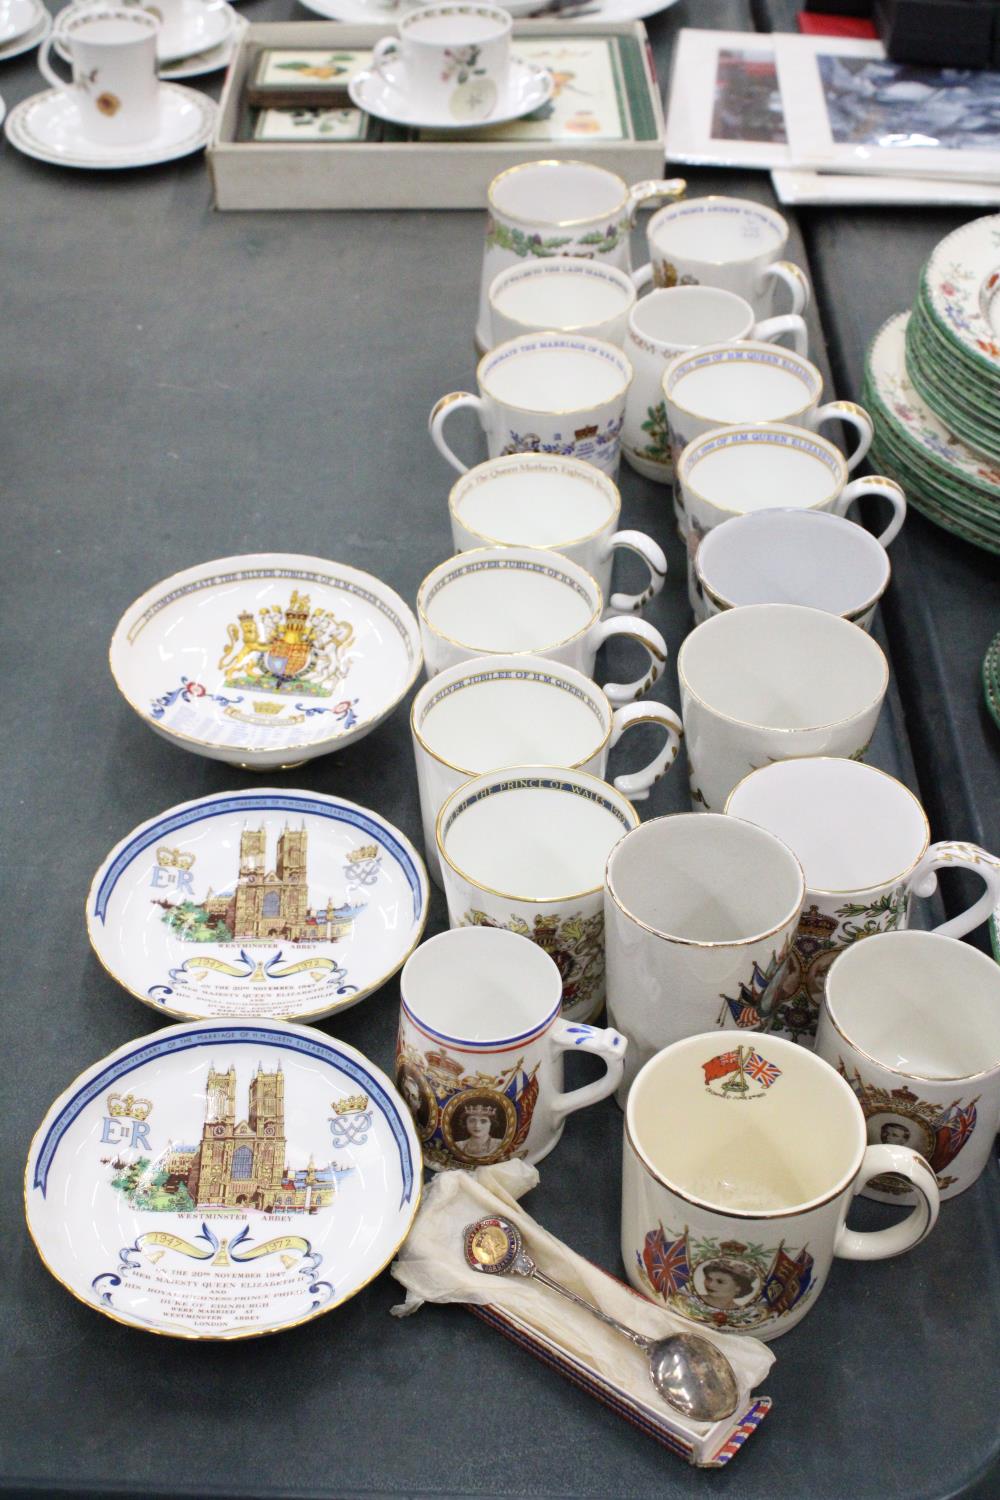 A COLLECTION OF COMMEMORATIVE WARE TO INCLUDE SPODE, AYNSLEY, MUGS ETC PLUS A BOM-BOM DISH WITH A